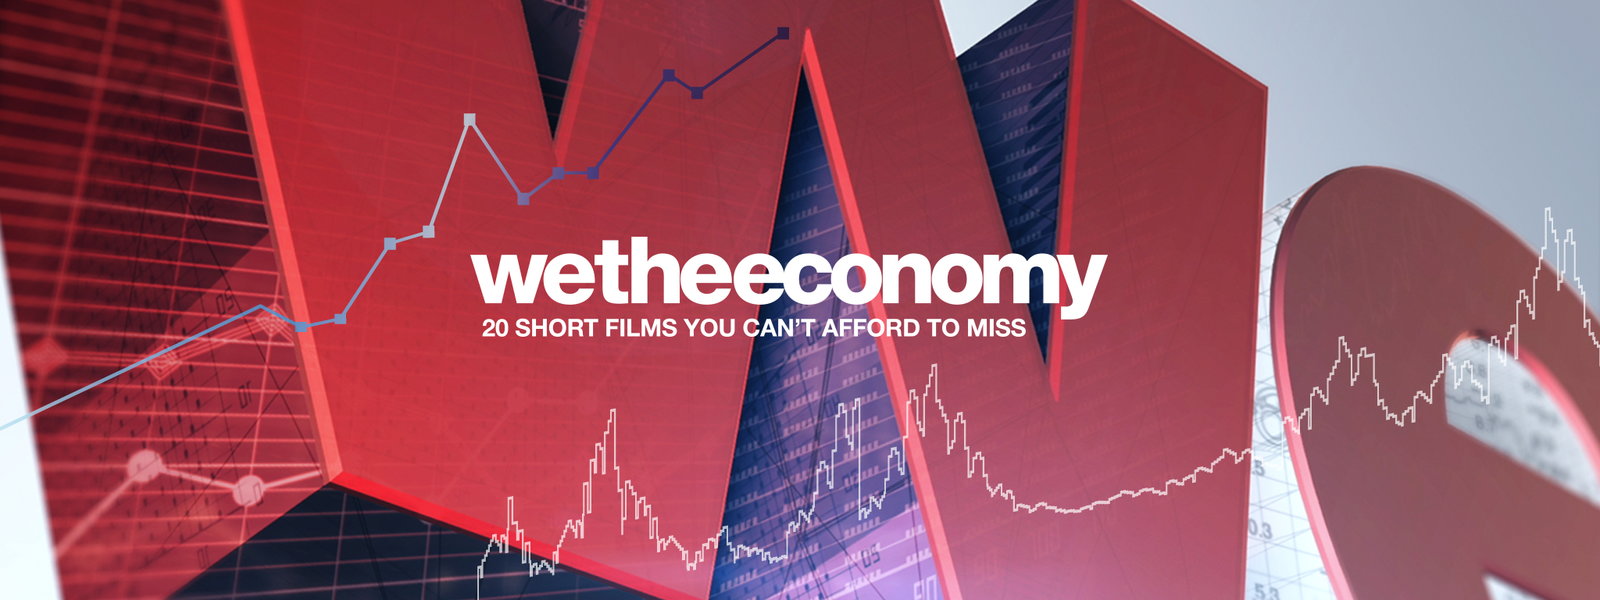 We the Economy: 20 Short Films You Can't Afford to Miss (2014)